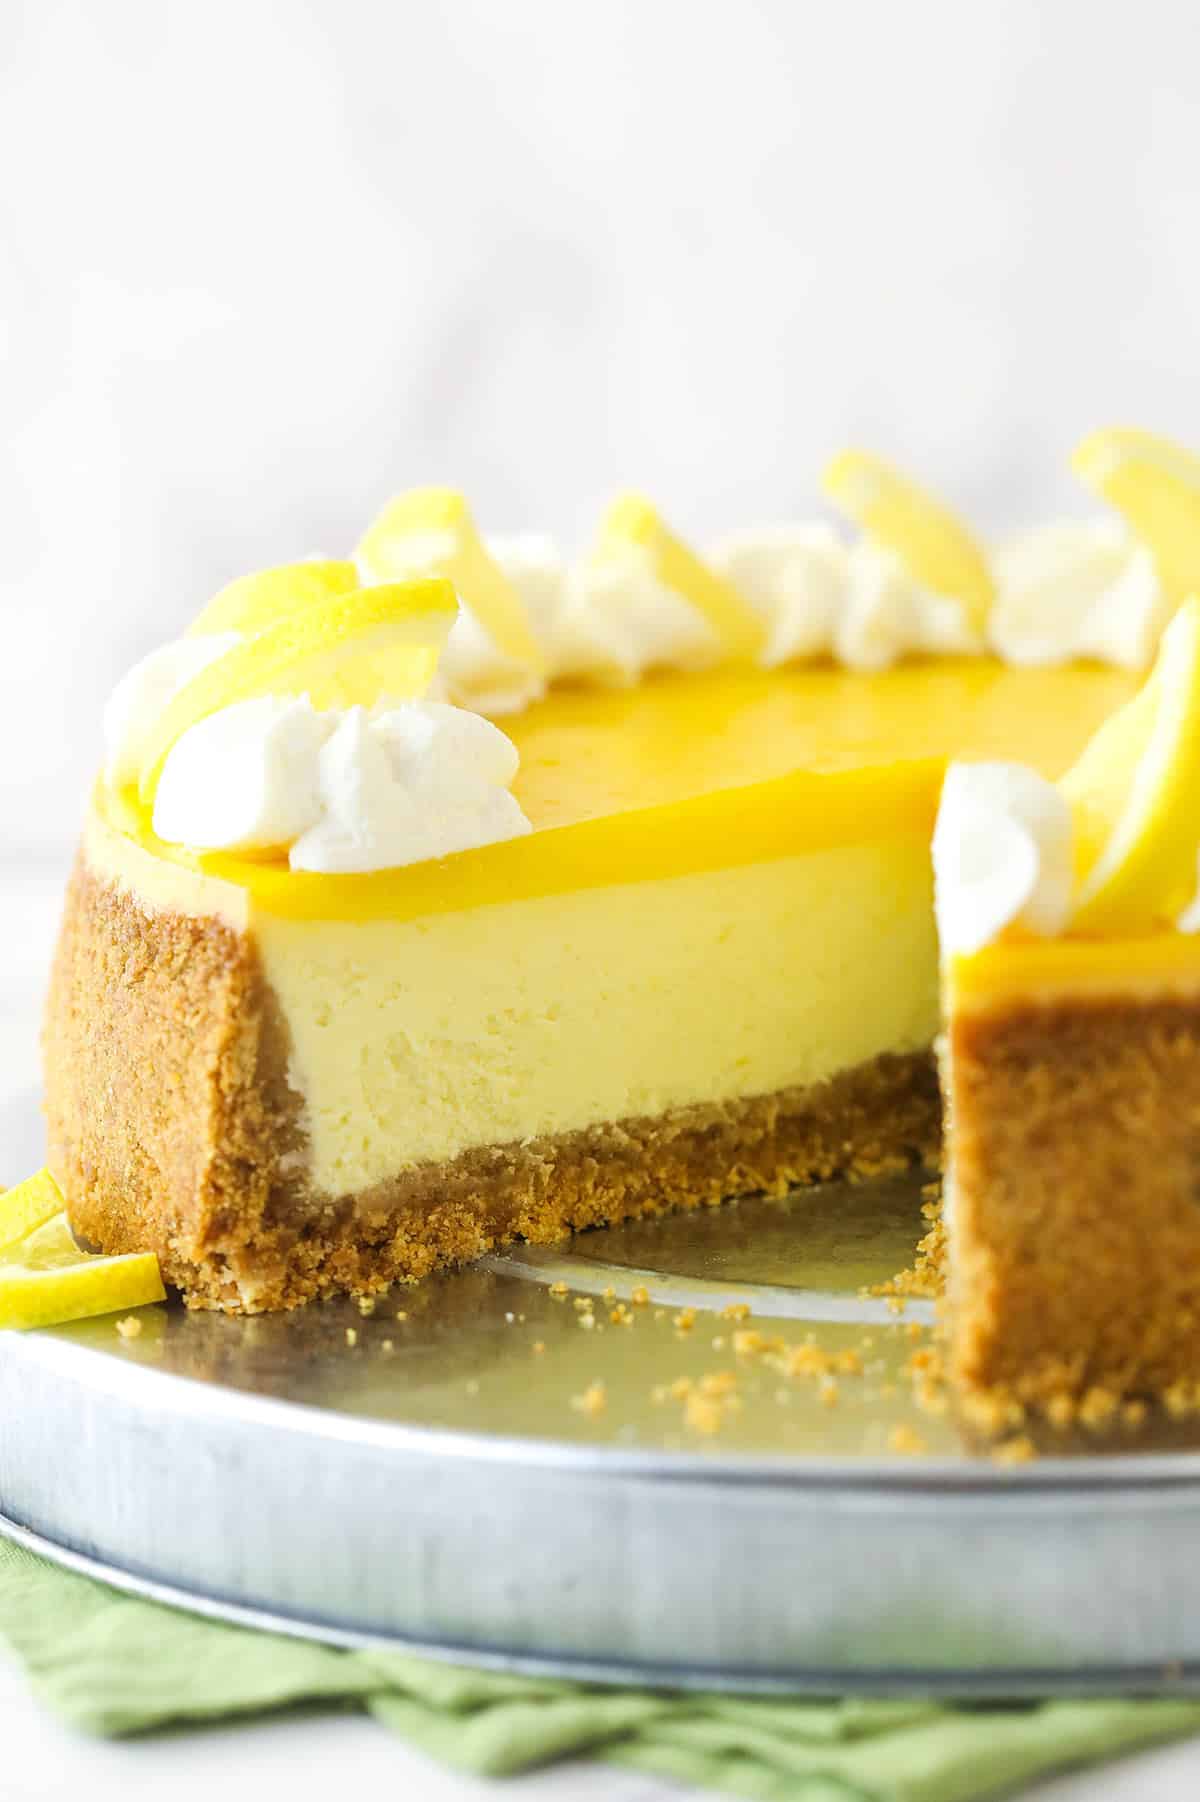 Lemon cheesecake on a cake platter with a slice taken out of it.